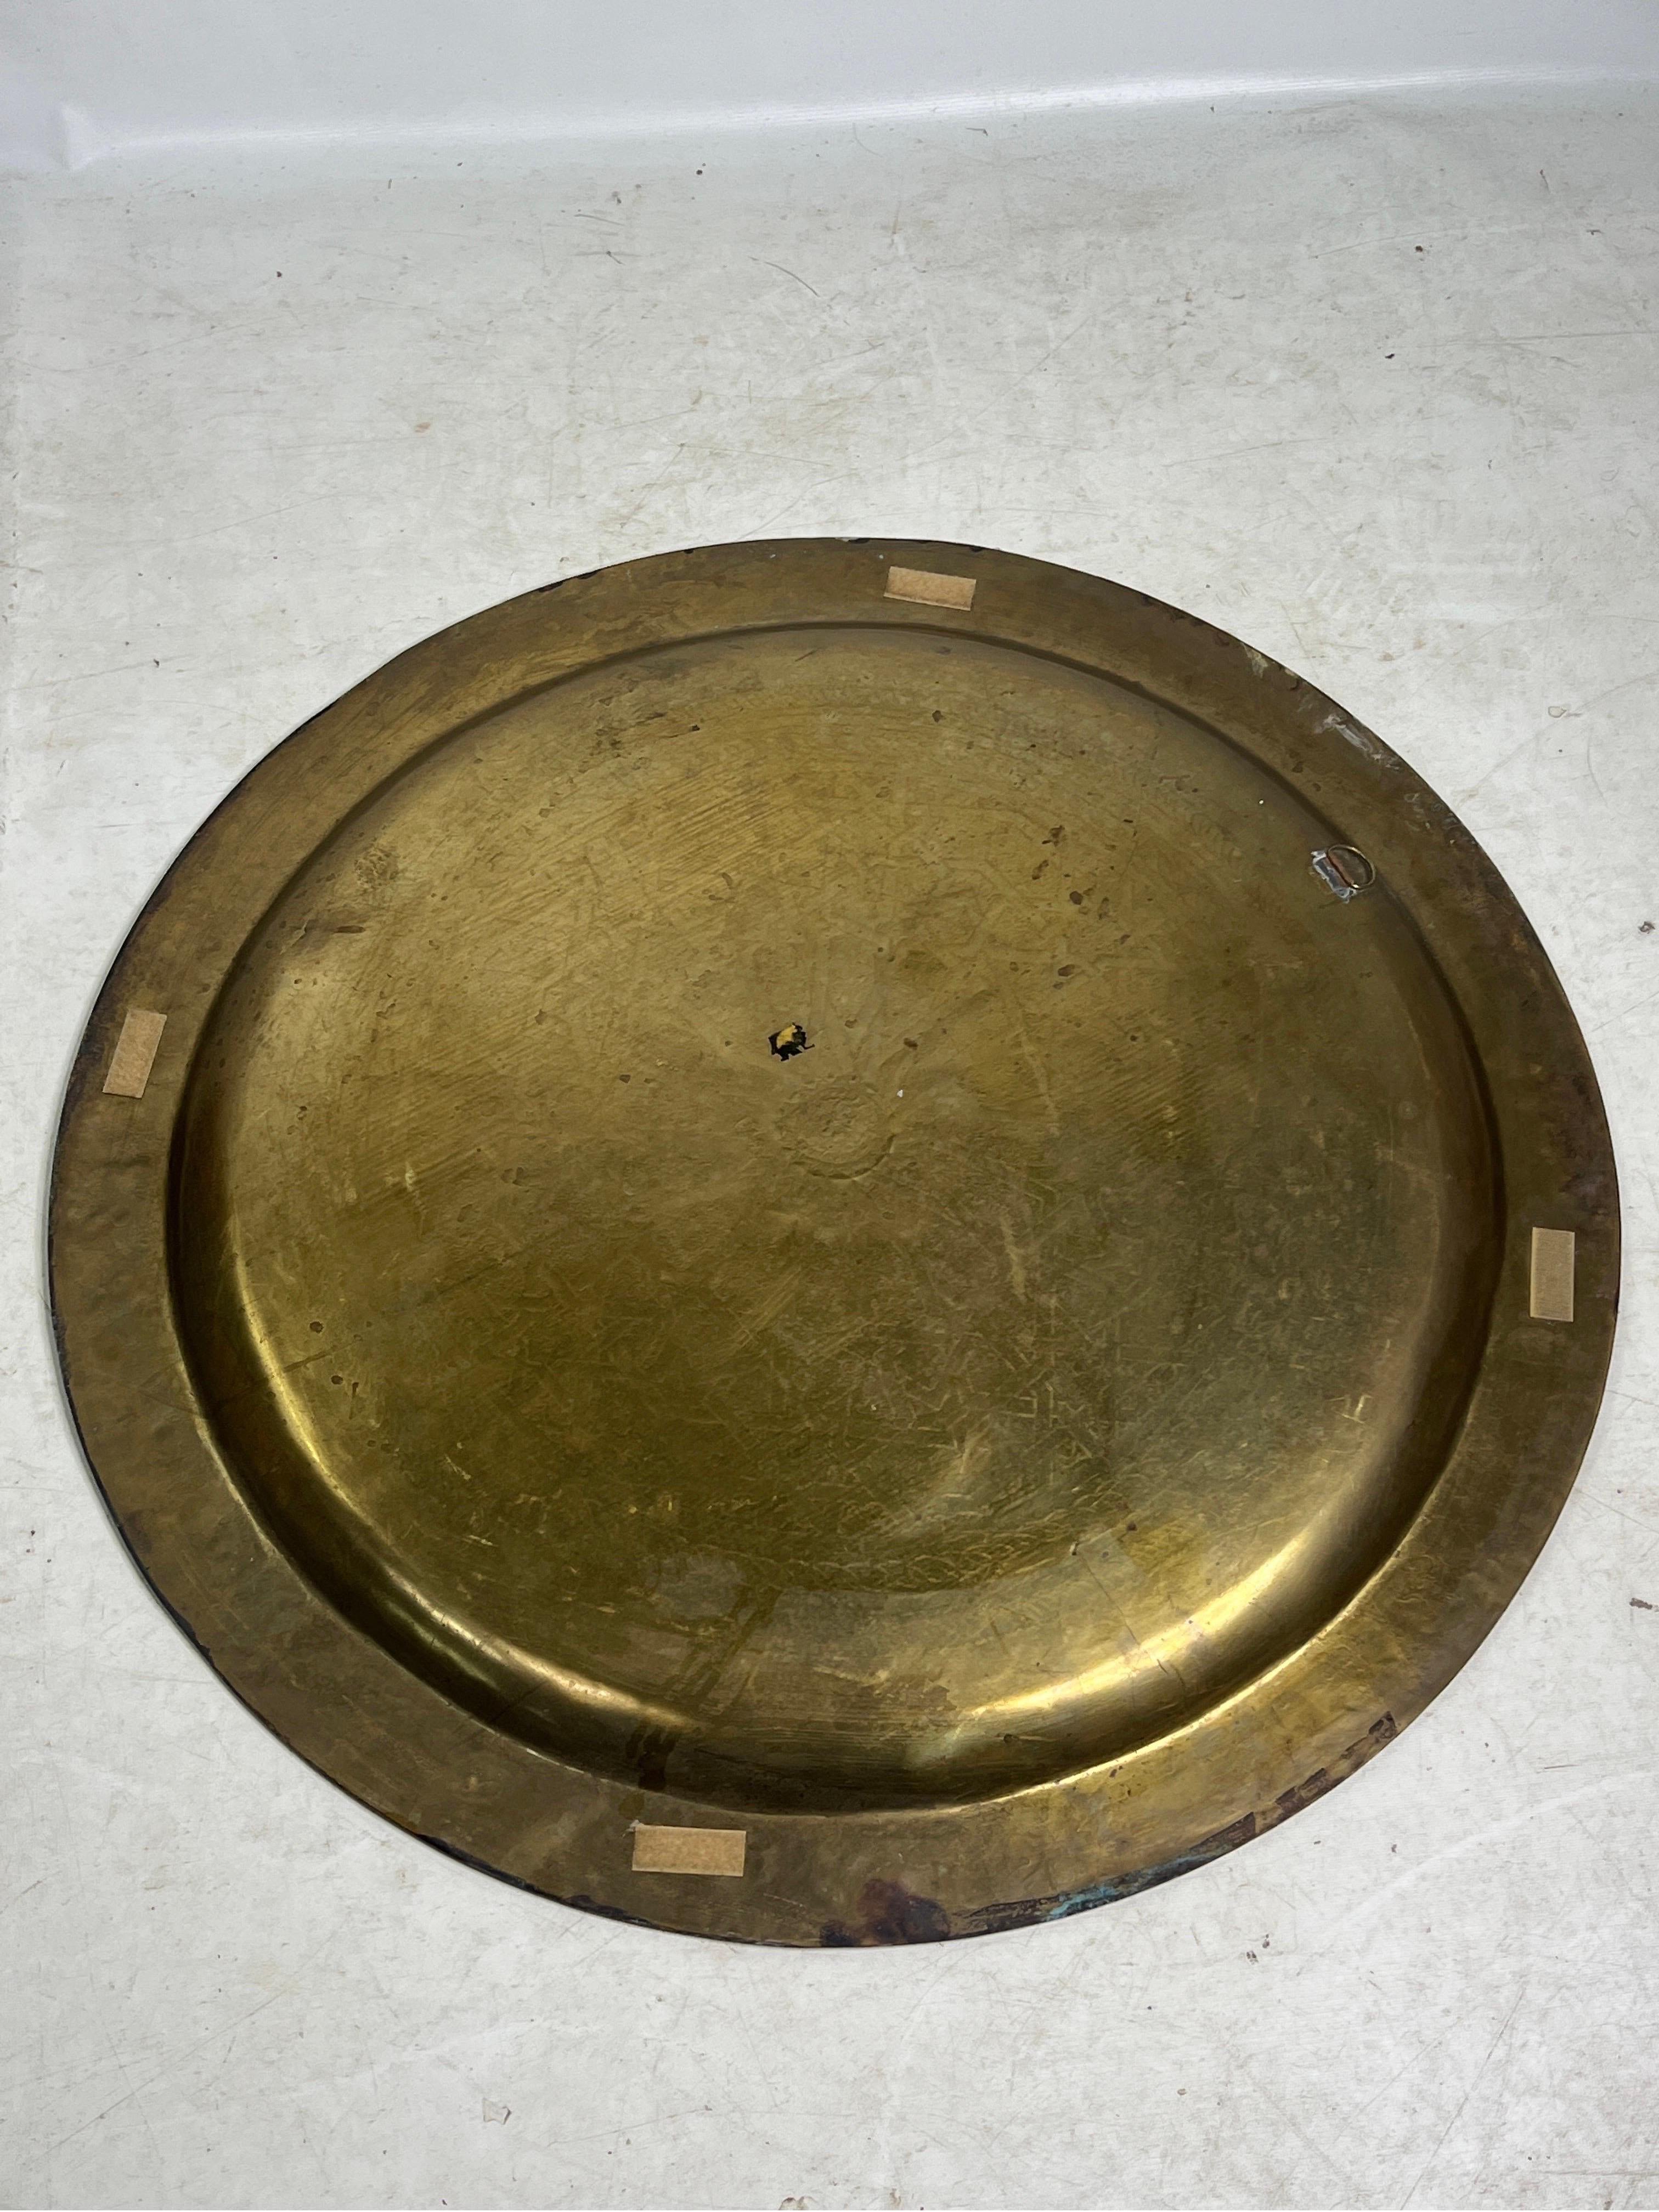 This vintage round solid brass tray is a beautiful decorative piece that is now available for sale. It features an exquisite design that adds a touch of elegance to any space.